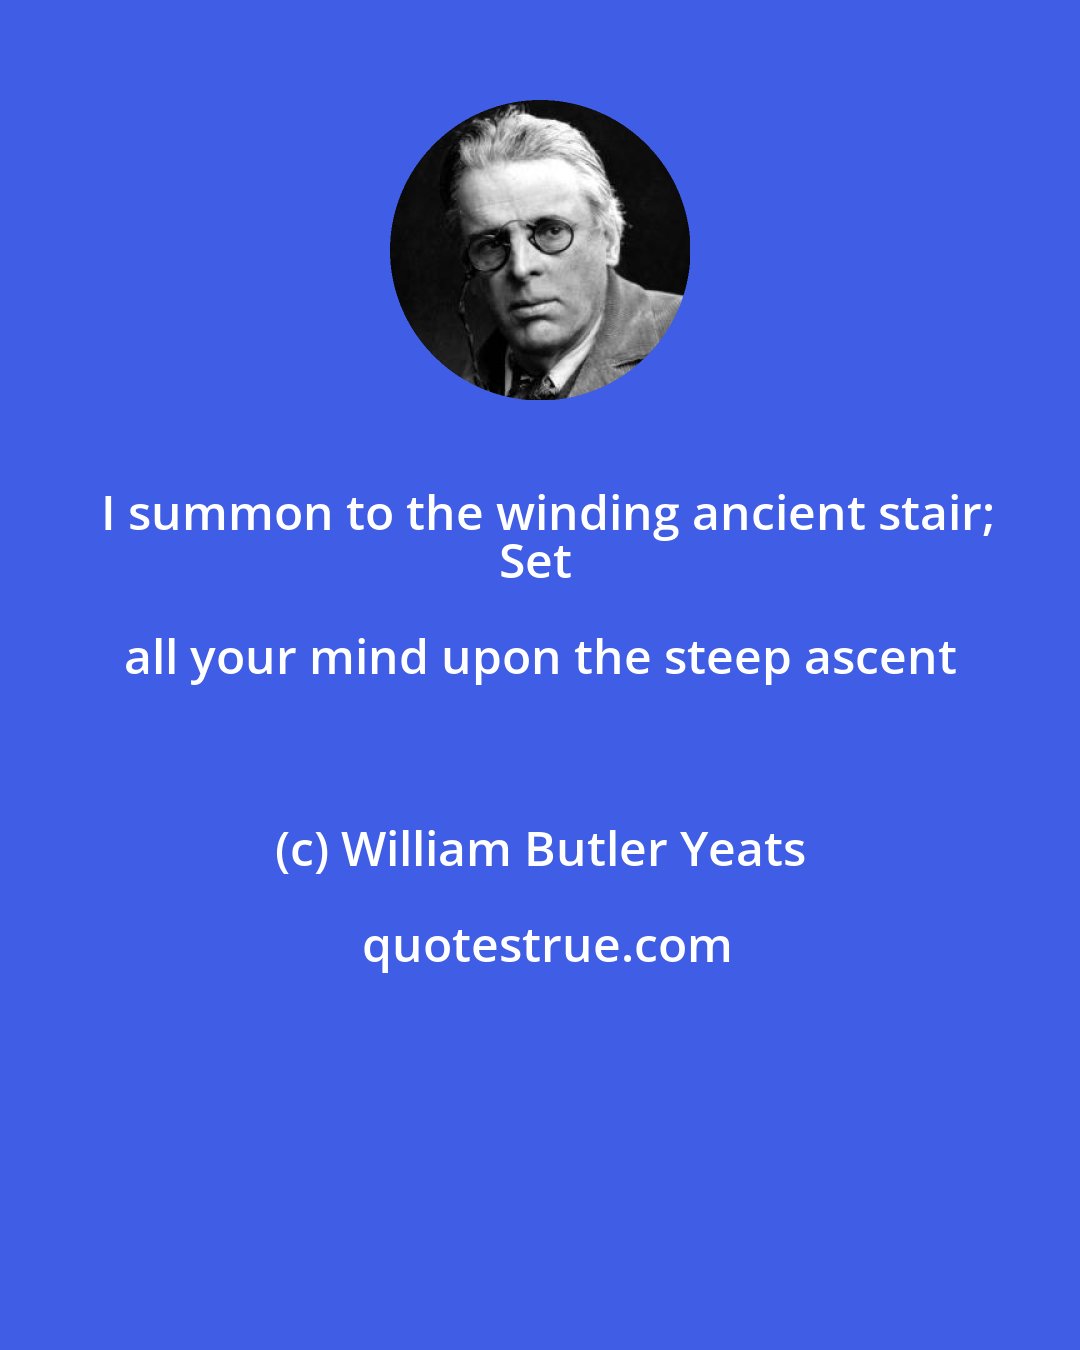 William Butler Yeats: I summon to the winding ancient stair;
Set all your mind upon the steep ascent